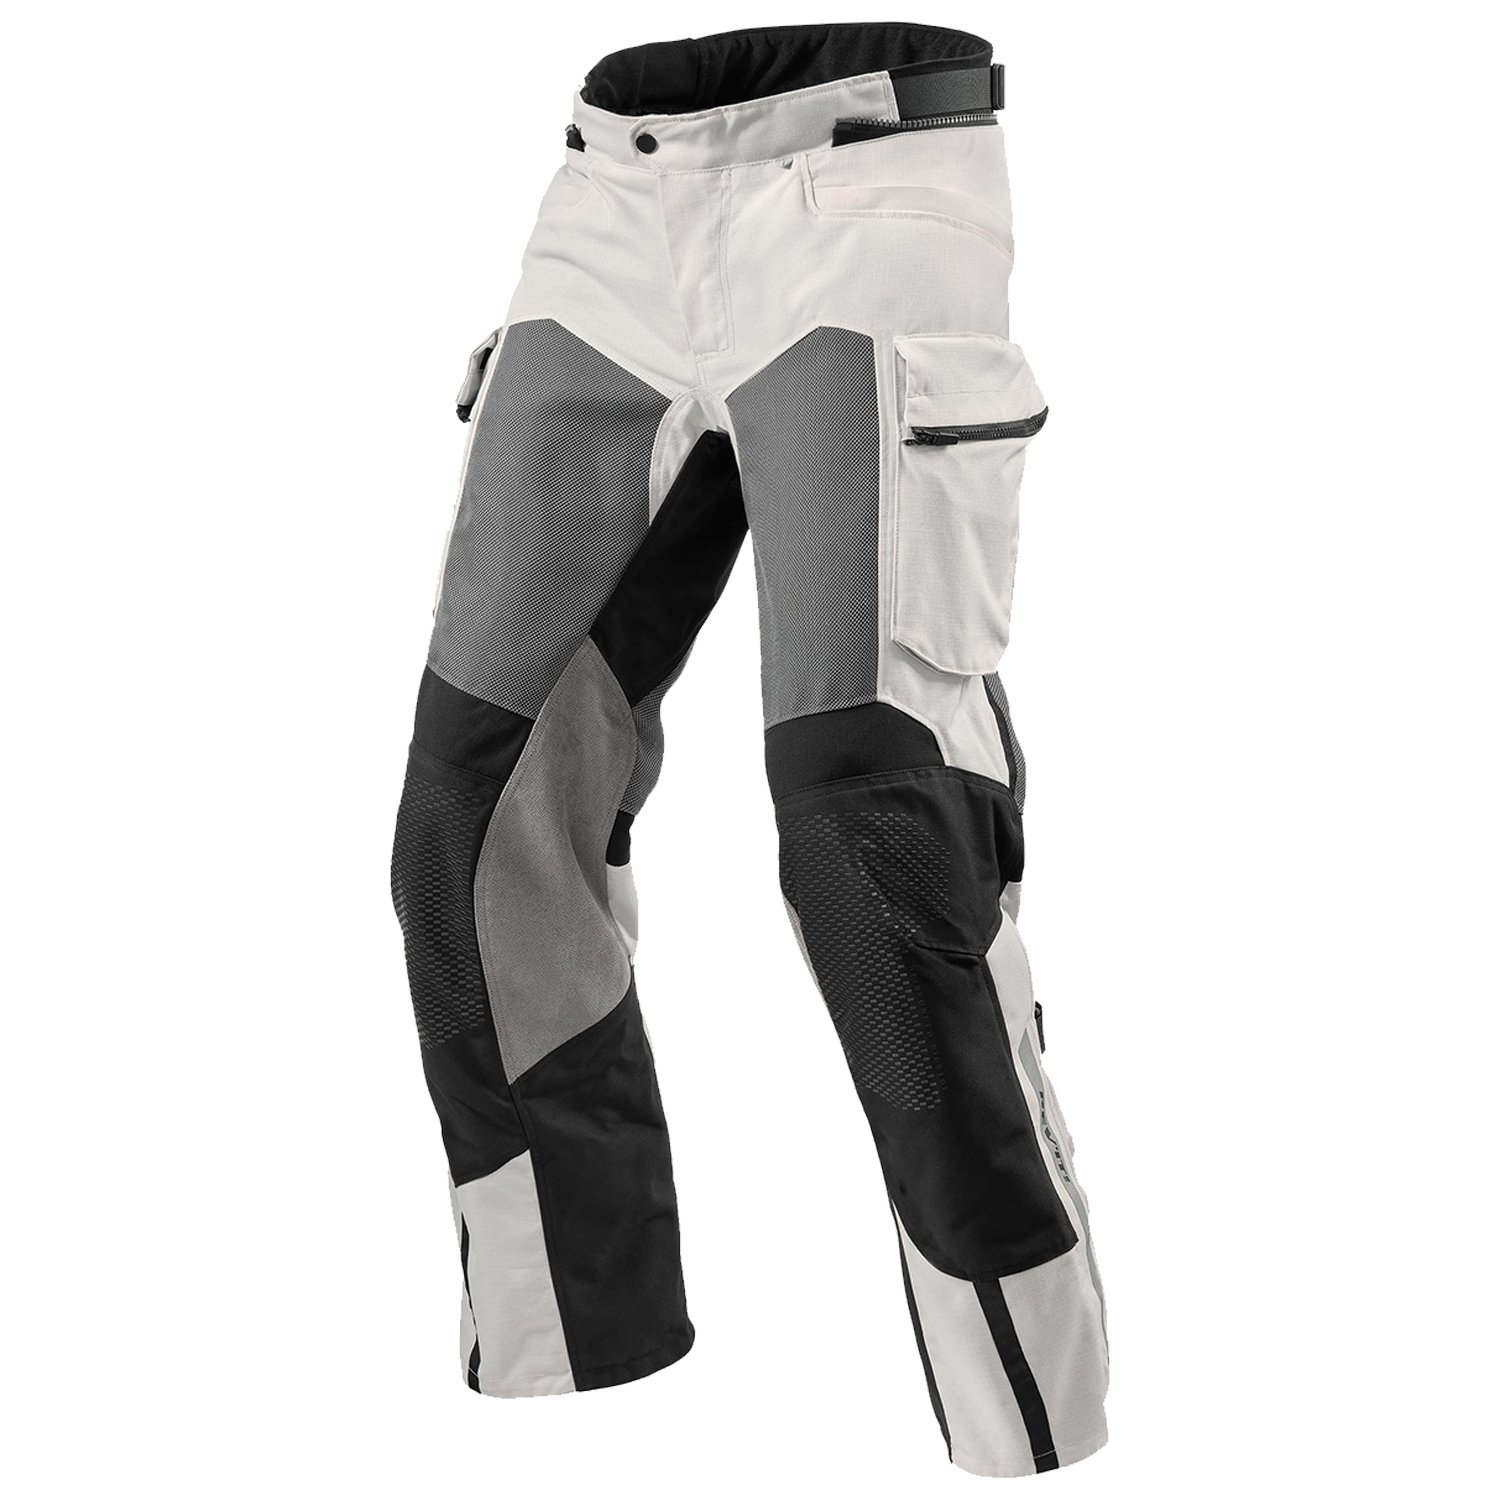 Image of REV'IT! Cayenne 2 Silver Short Motorcycle Pants Talla M